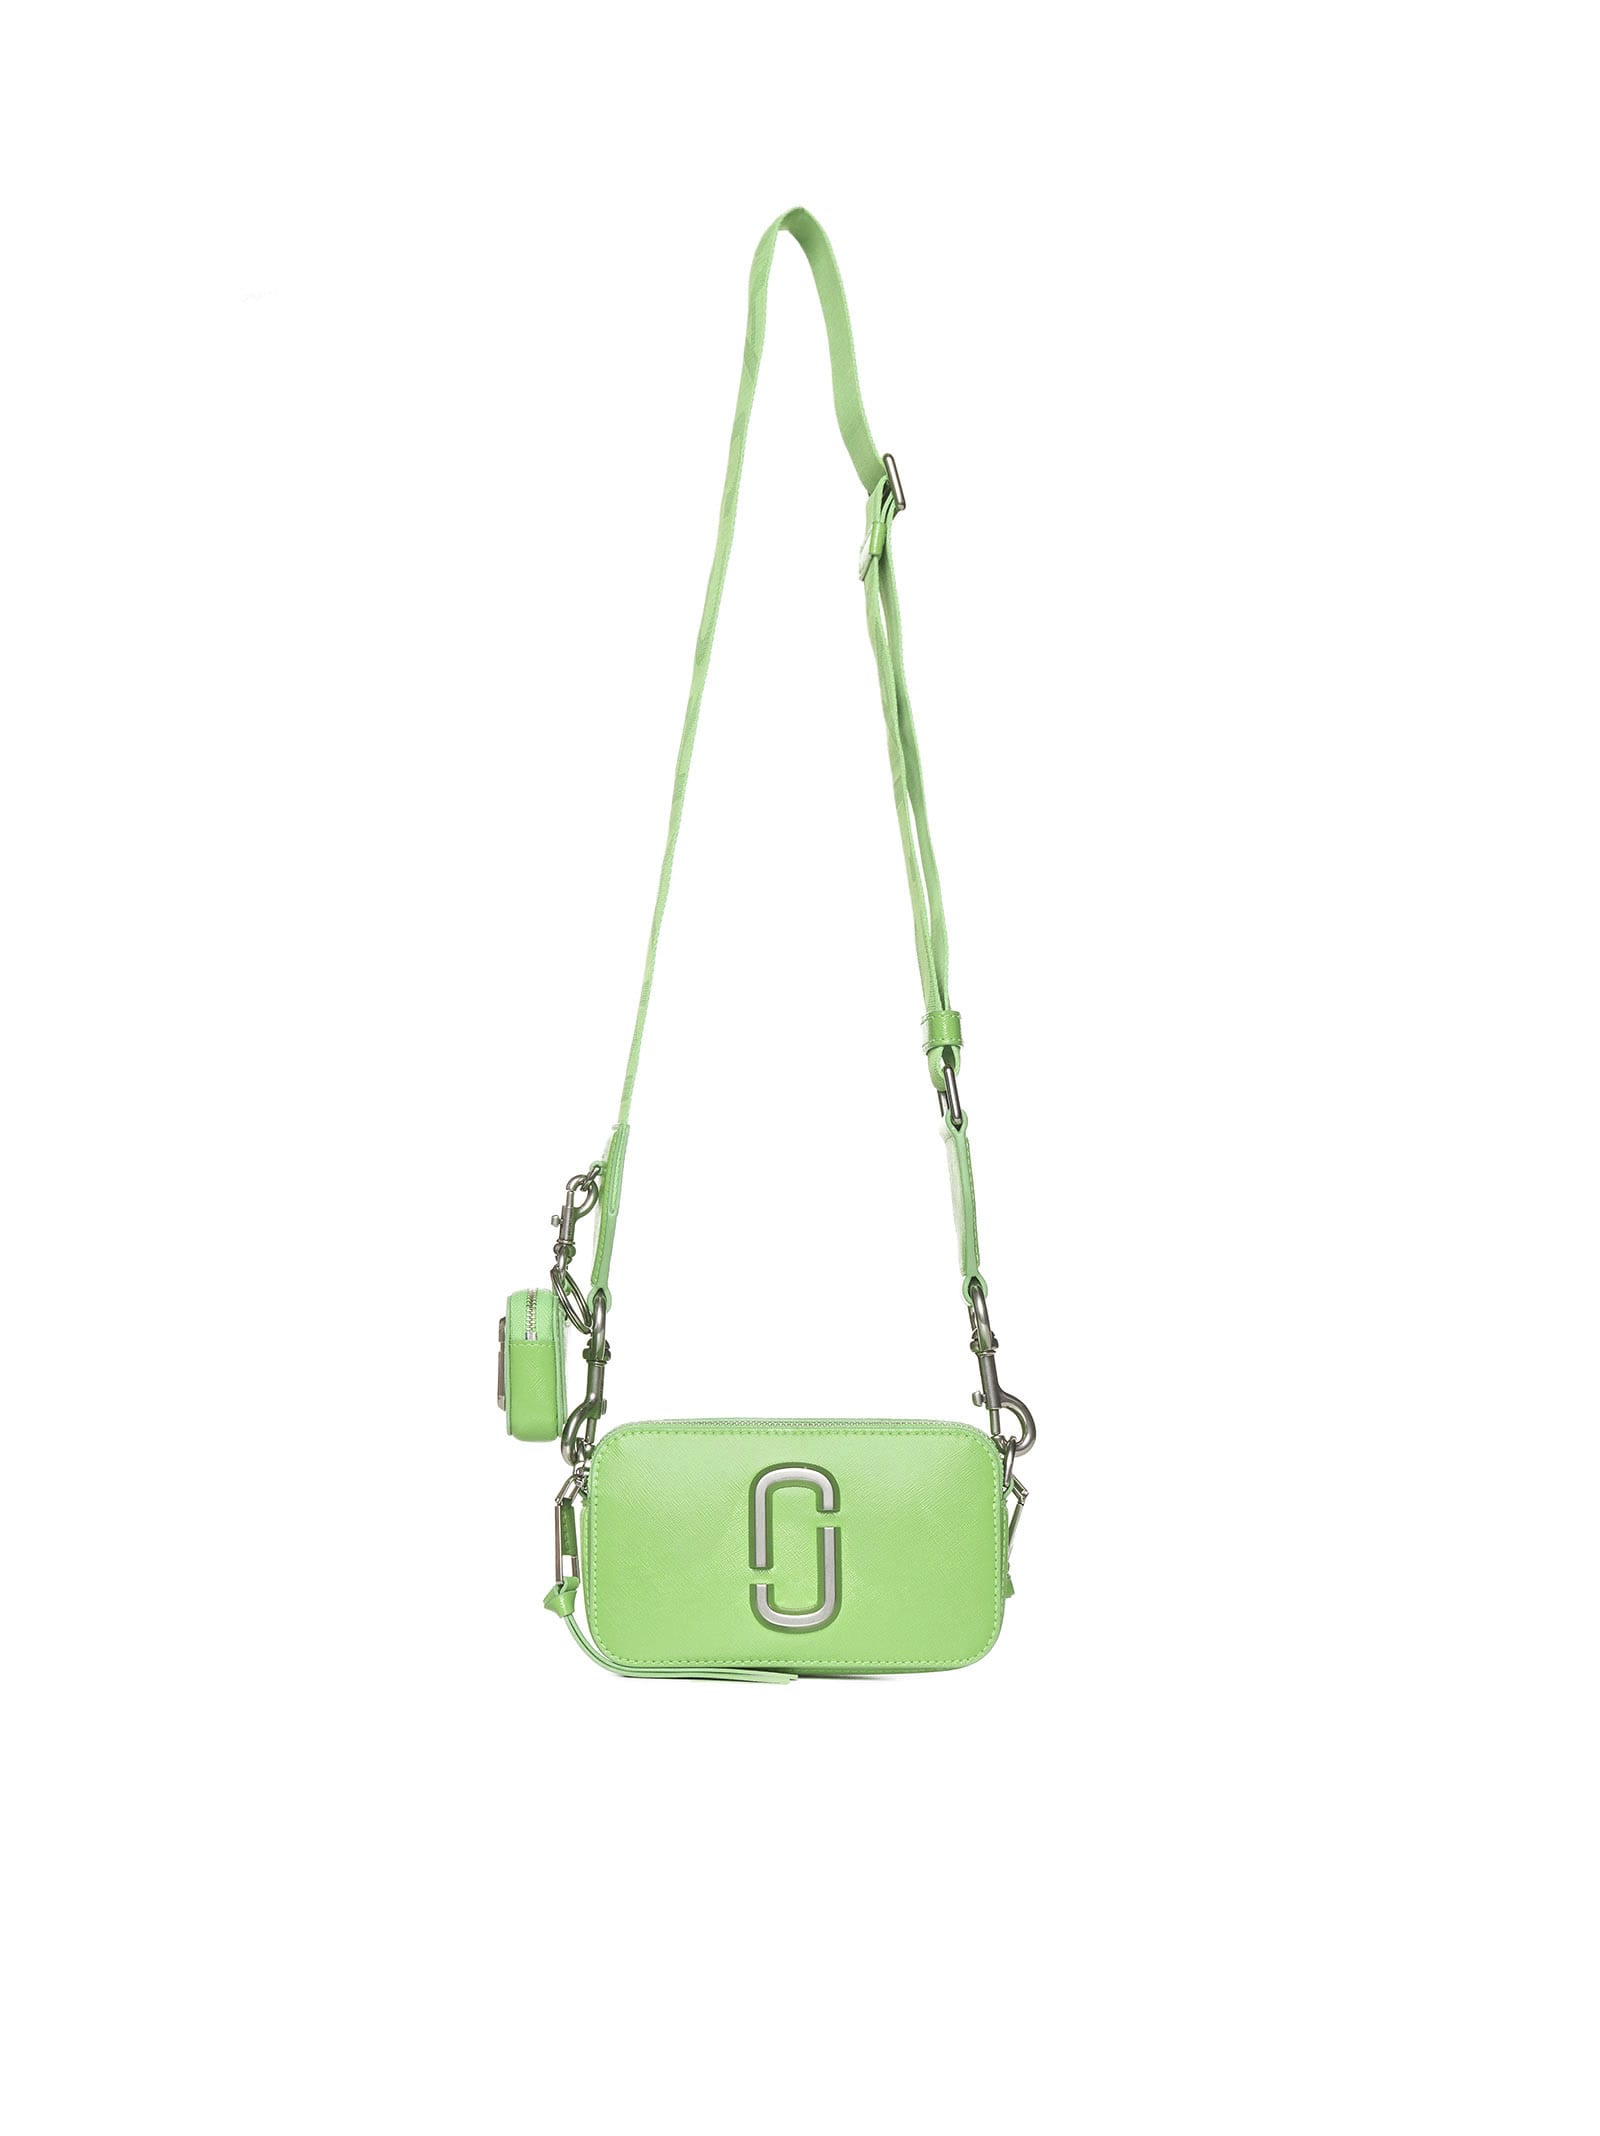 MARC JACOBS THE UTILITY SNAPSHOT